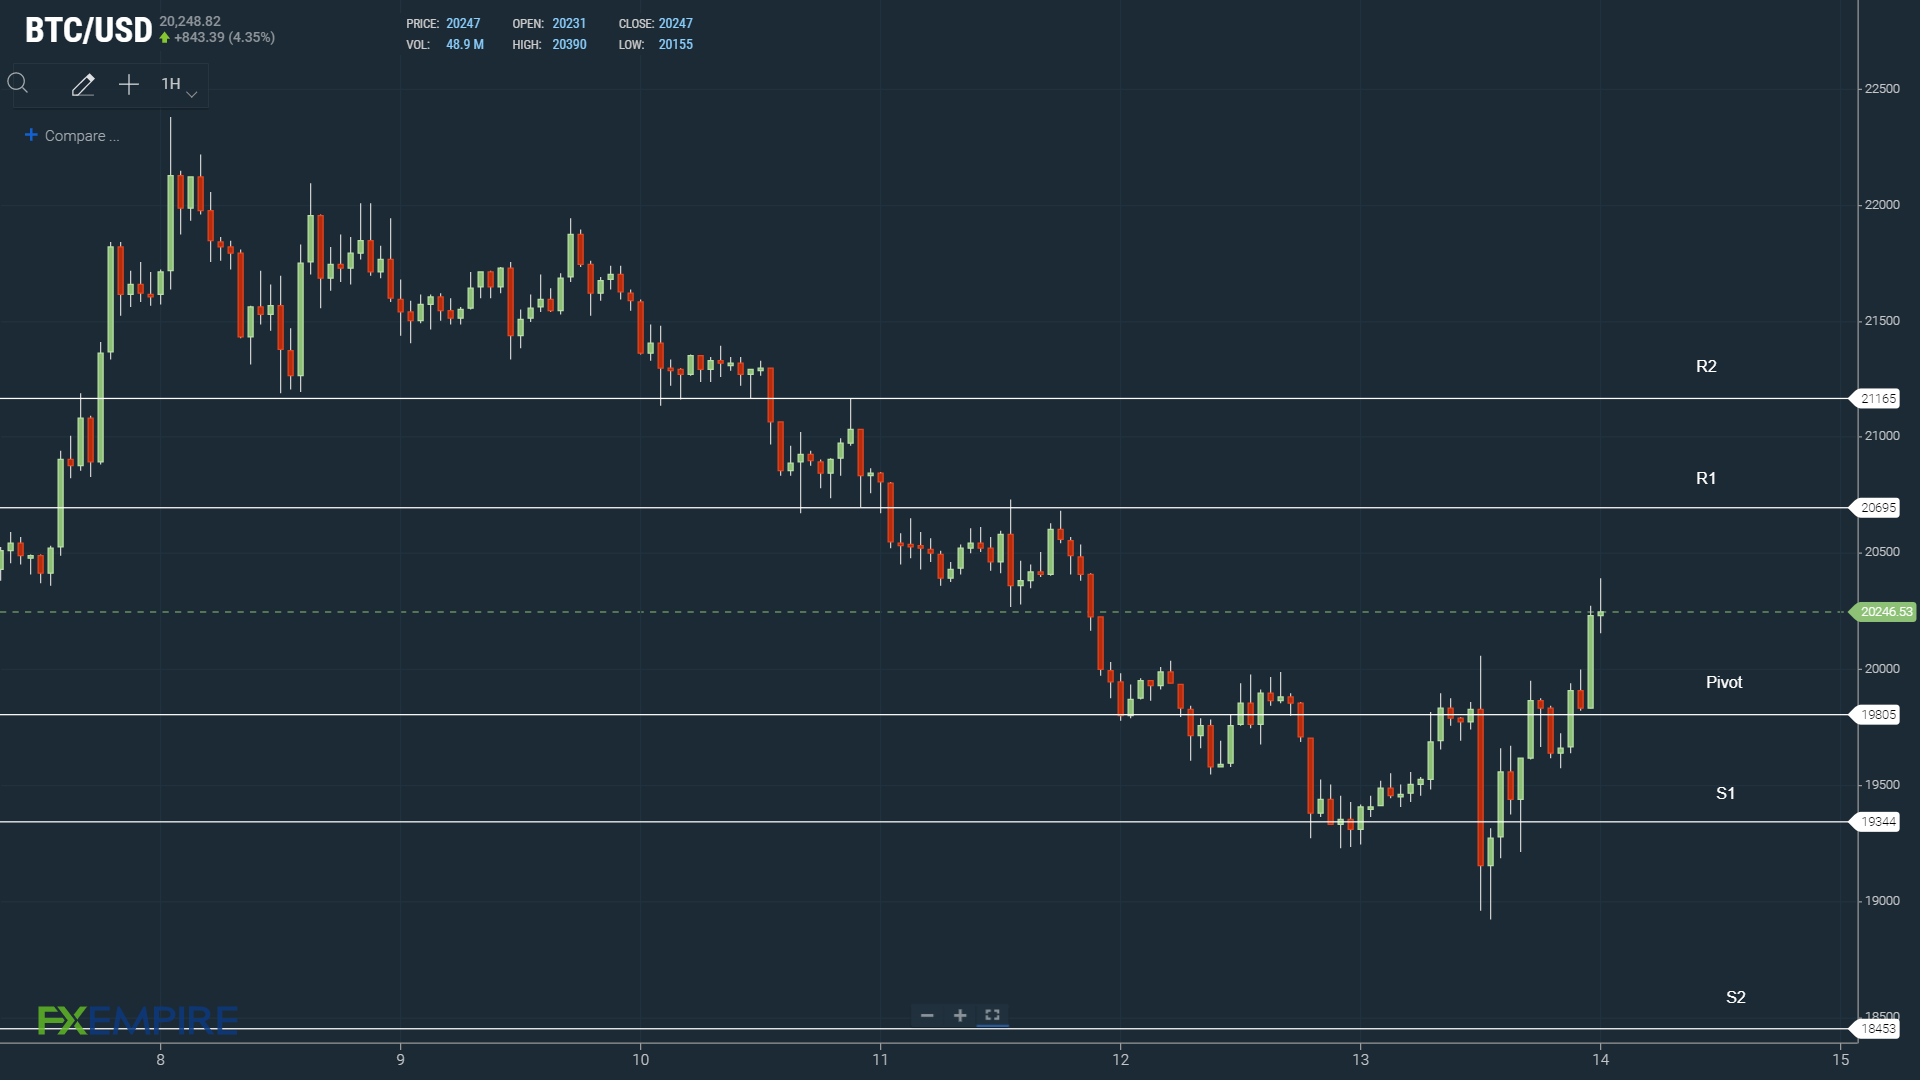 BTC resistance levels in play